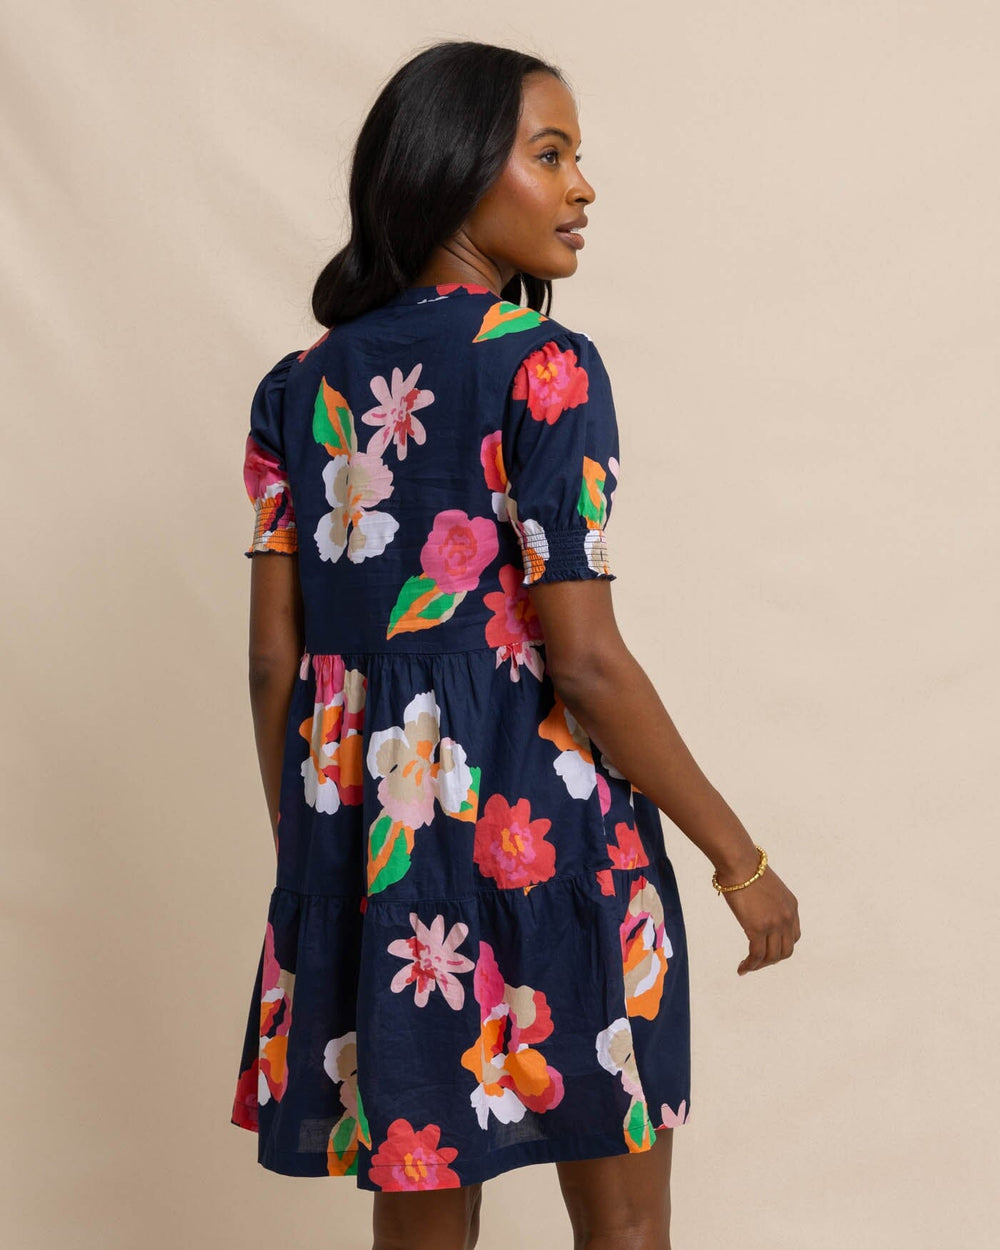 The back view of the Southern Tide Mina Garden Splendor Tiered Dress by Southern Tide - Dress Blue